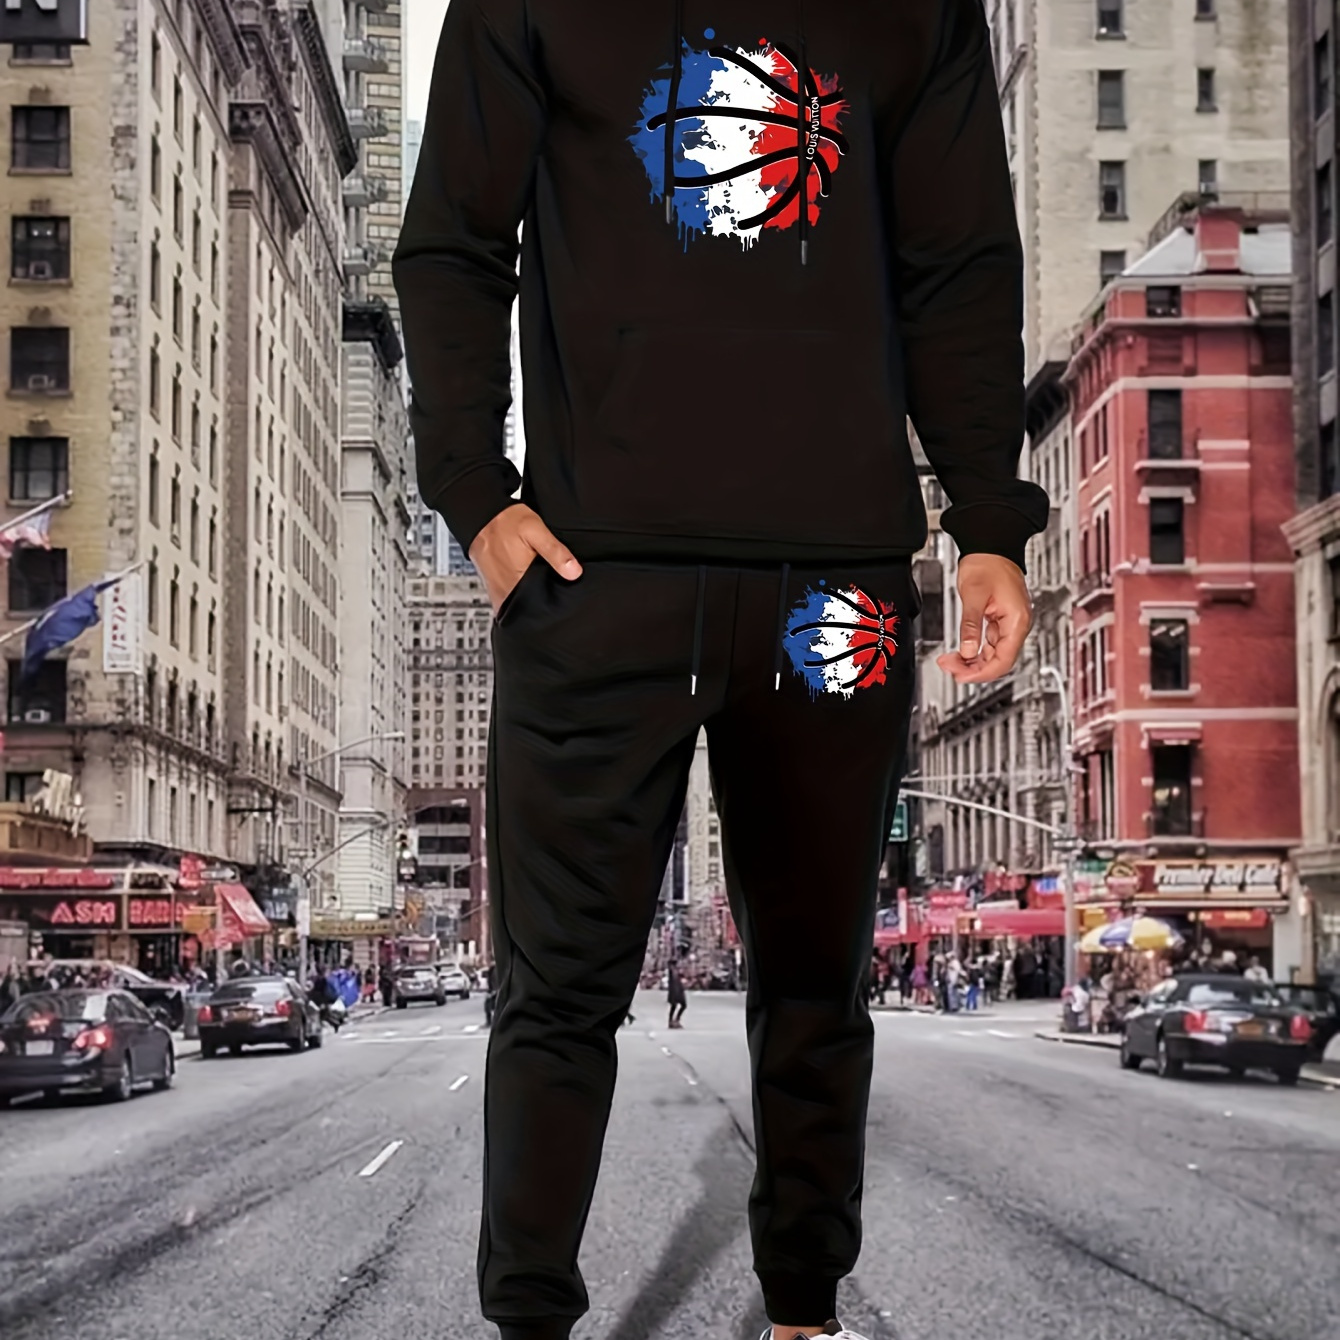 Basketball Print, Men's Outfits, Casual Hoodies Long Sleeve